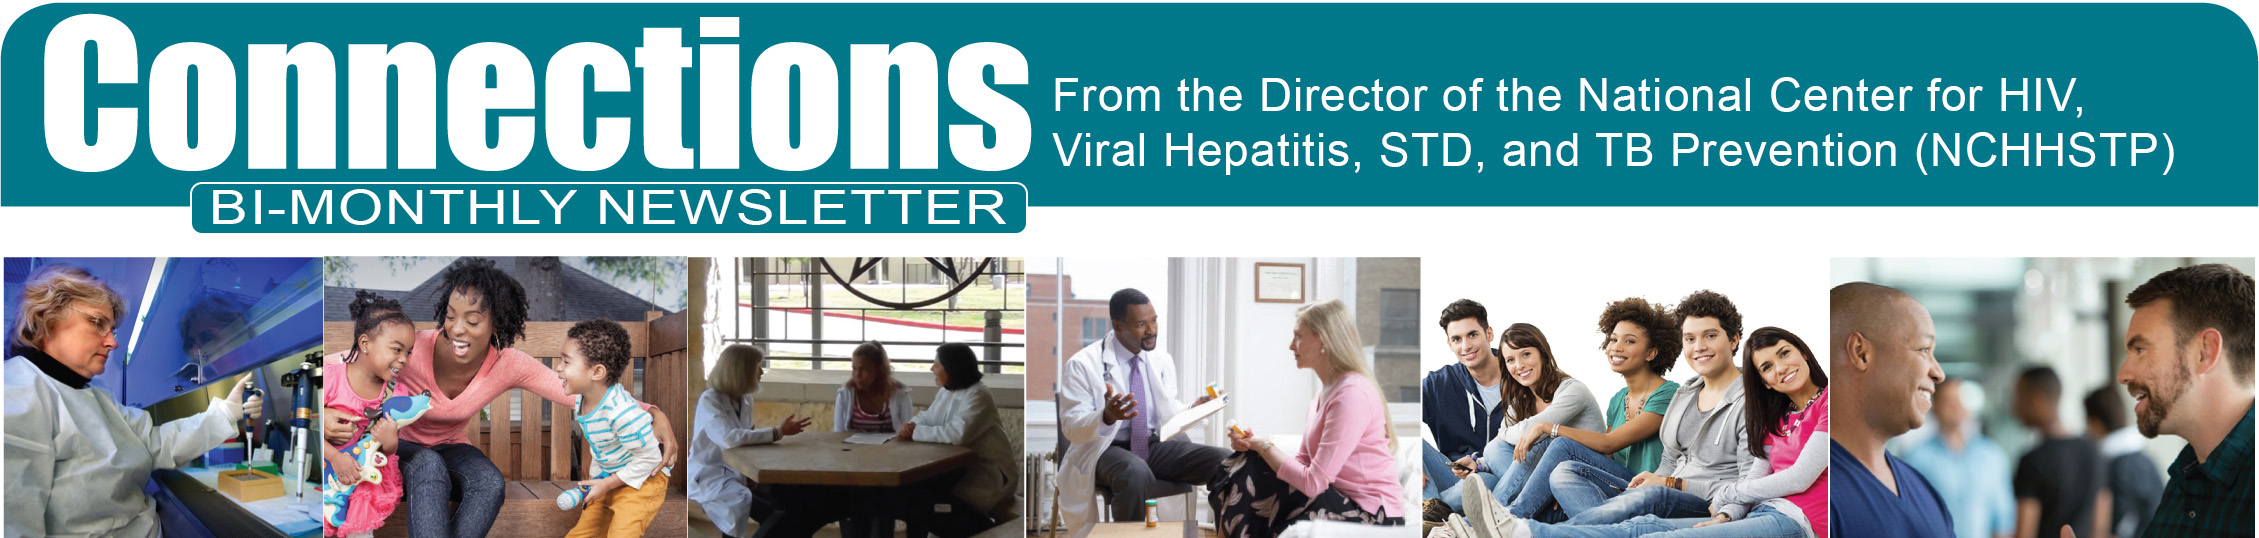 CONNECTIONS From the National Center for HIV, Viral Hepatitis, STD, and TB Prevention